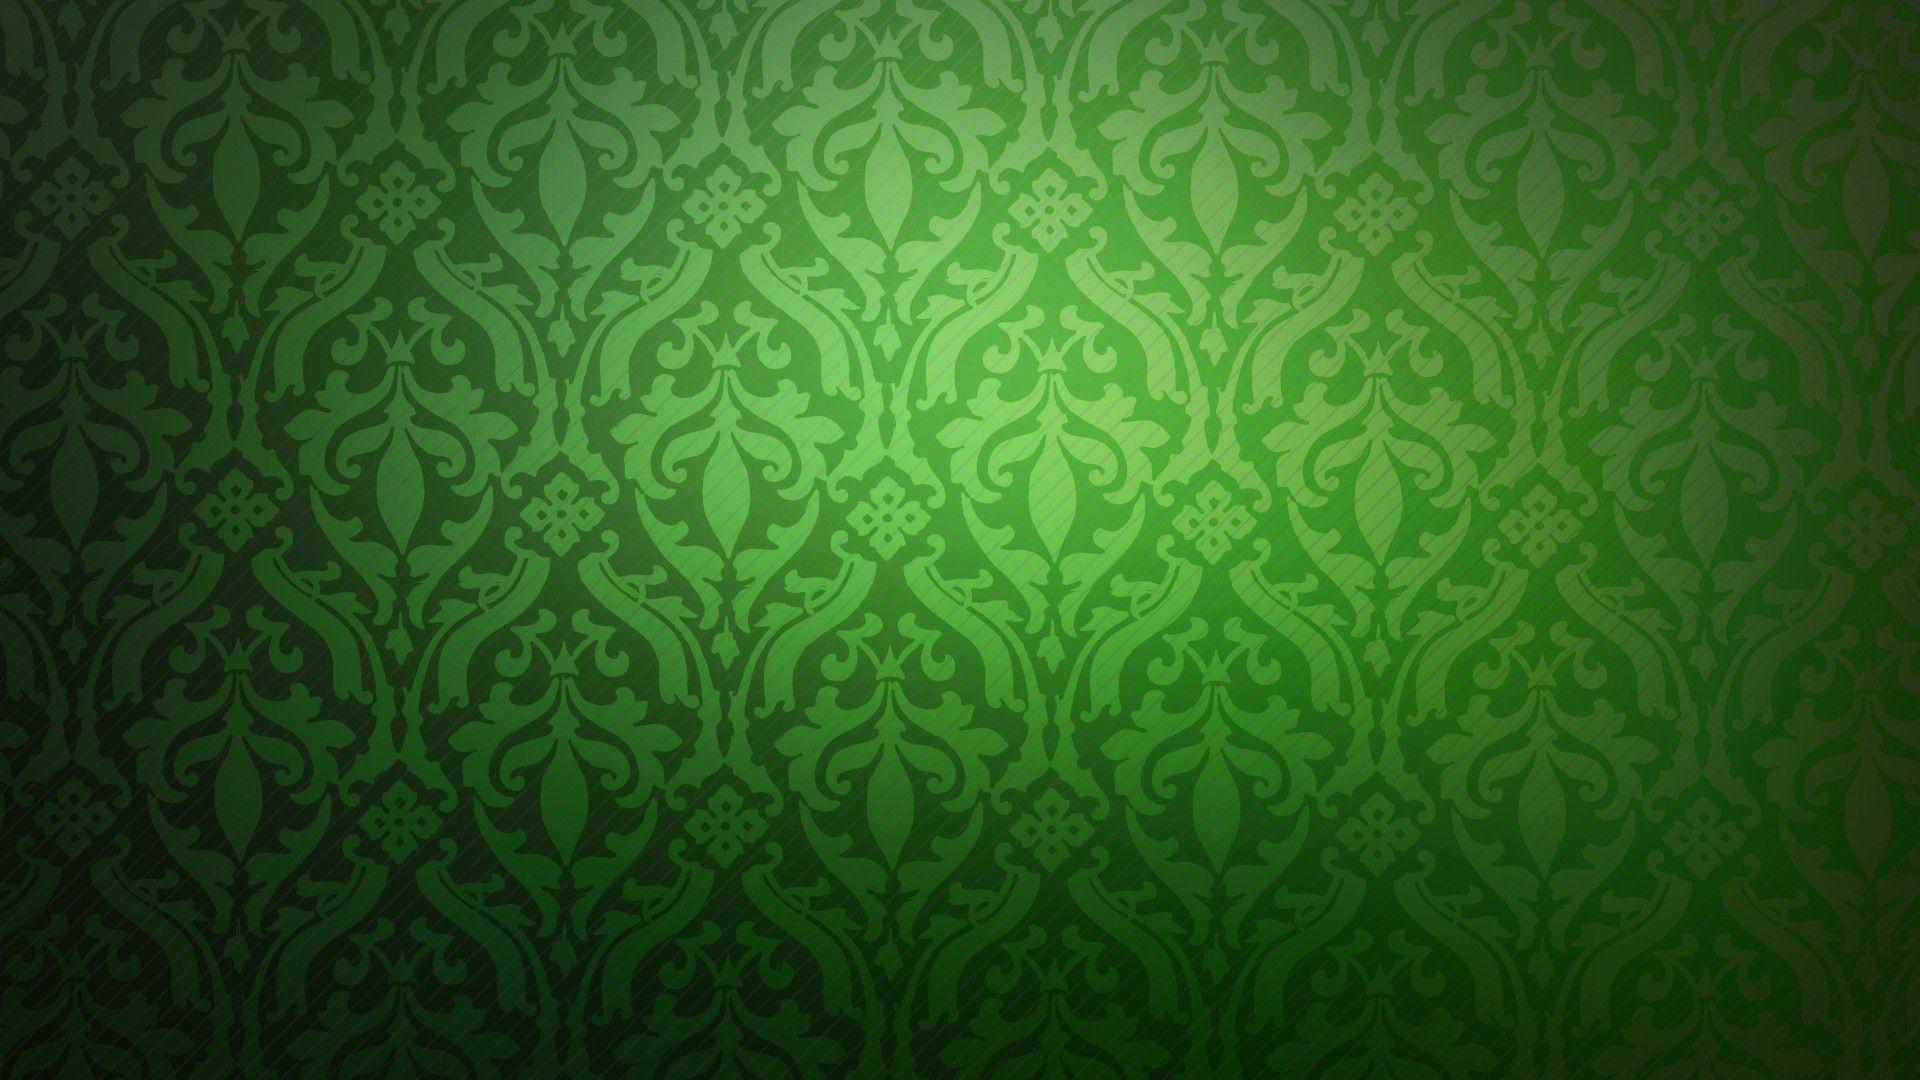 Green screen background image